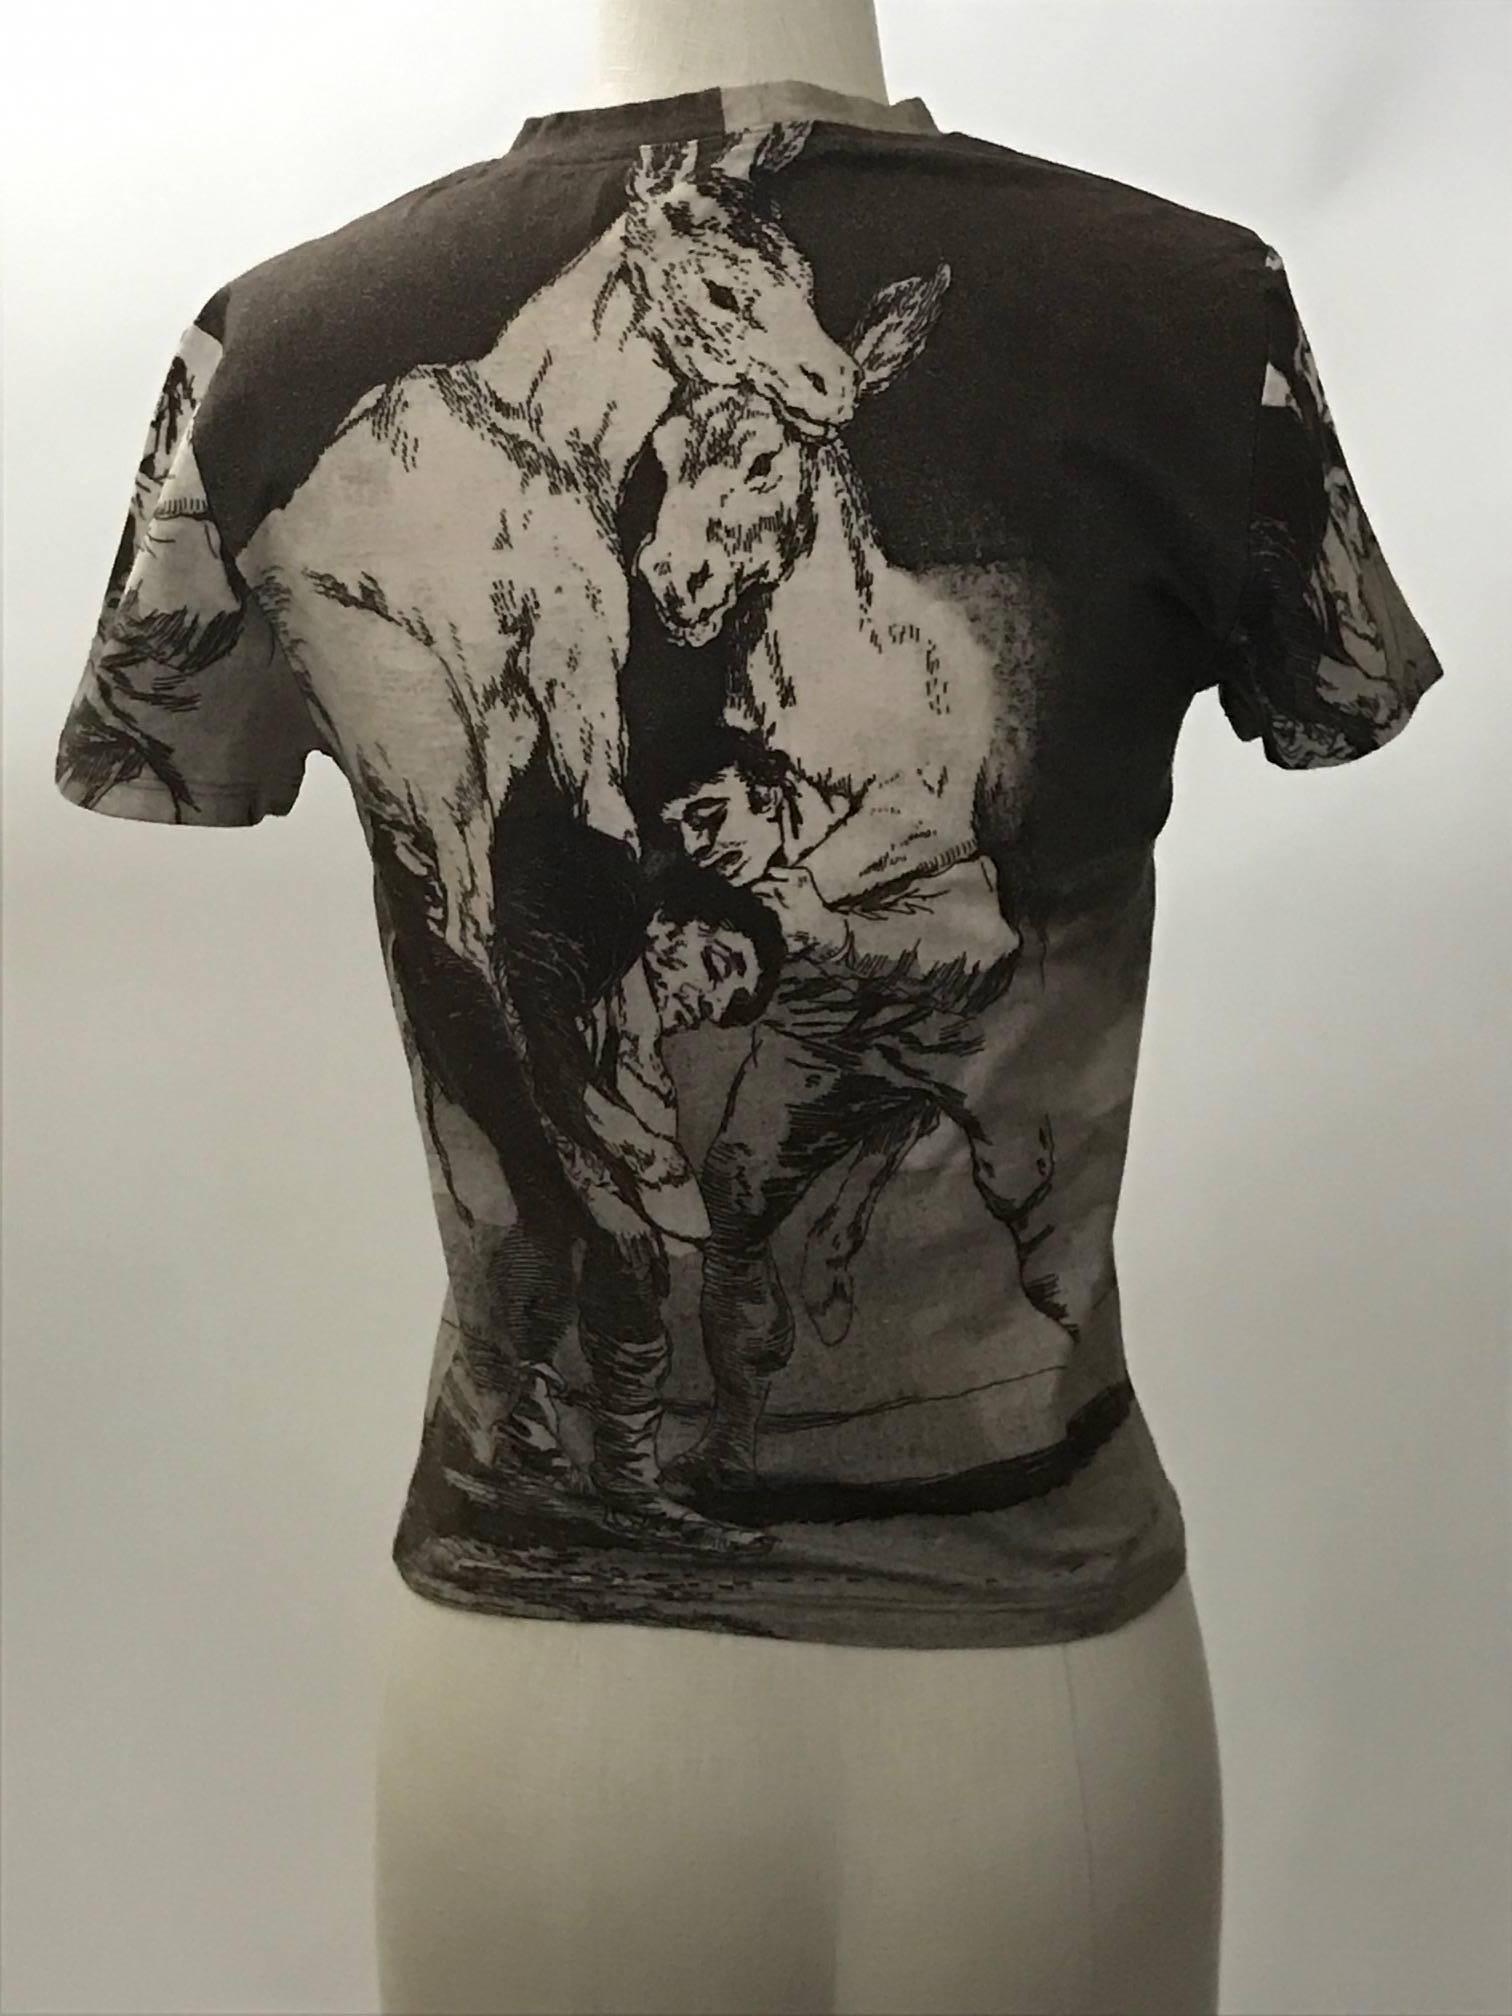 Extremely rare Alexander McQueen 1990s short sleeve crew neck t-shirt in light chocolate brown featuring Francisco Goya's 1799 print Tu Que no Puedes (They Who Cannot) from the series Los Caprichos featuring two men straining to carry a pair of